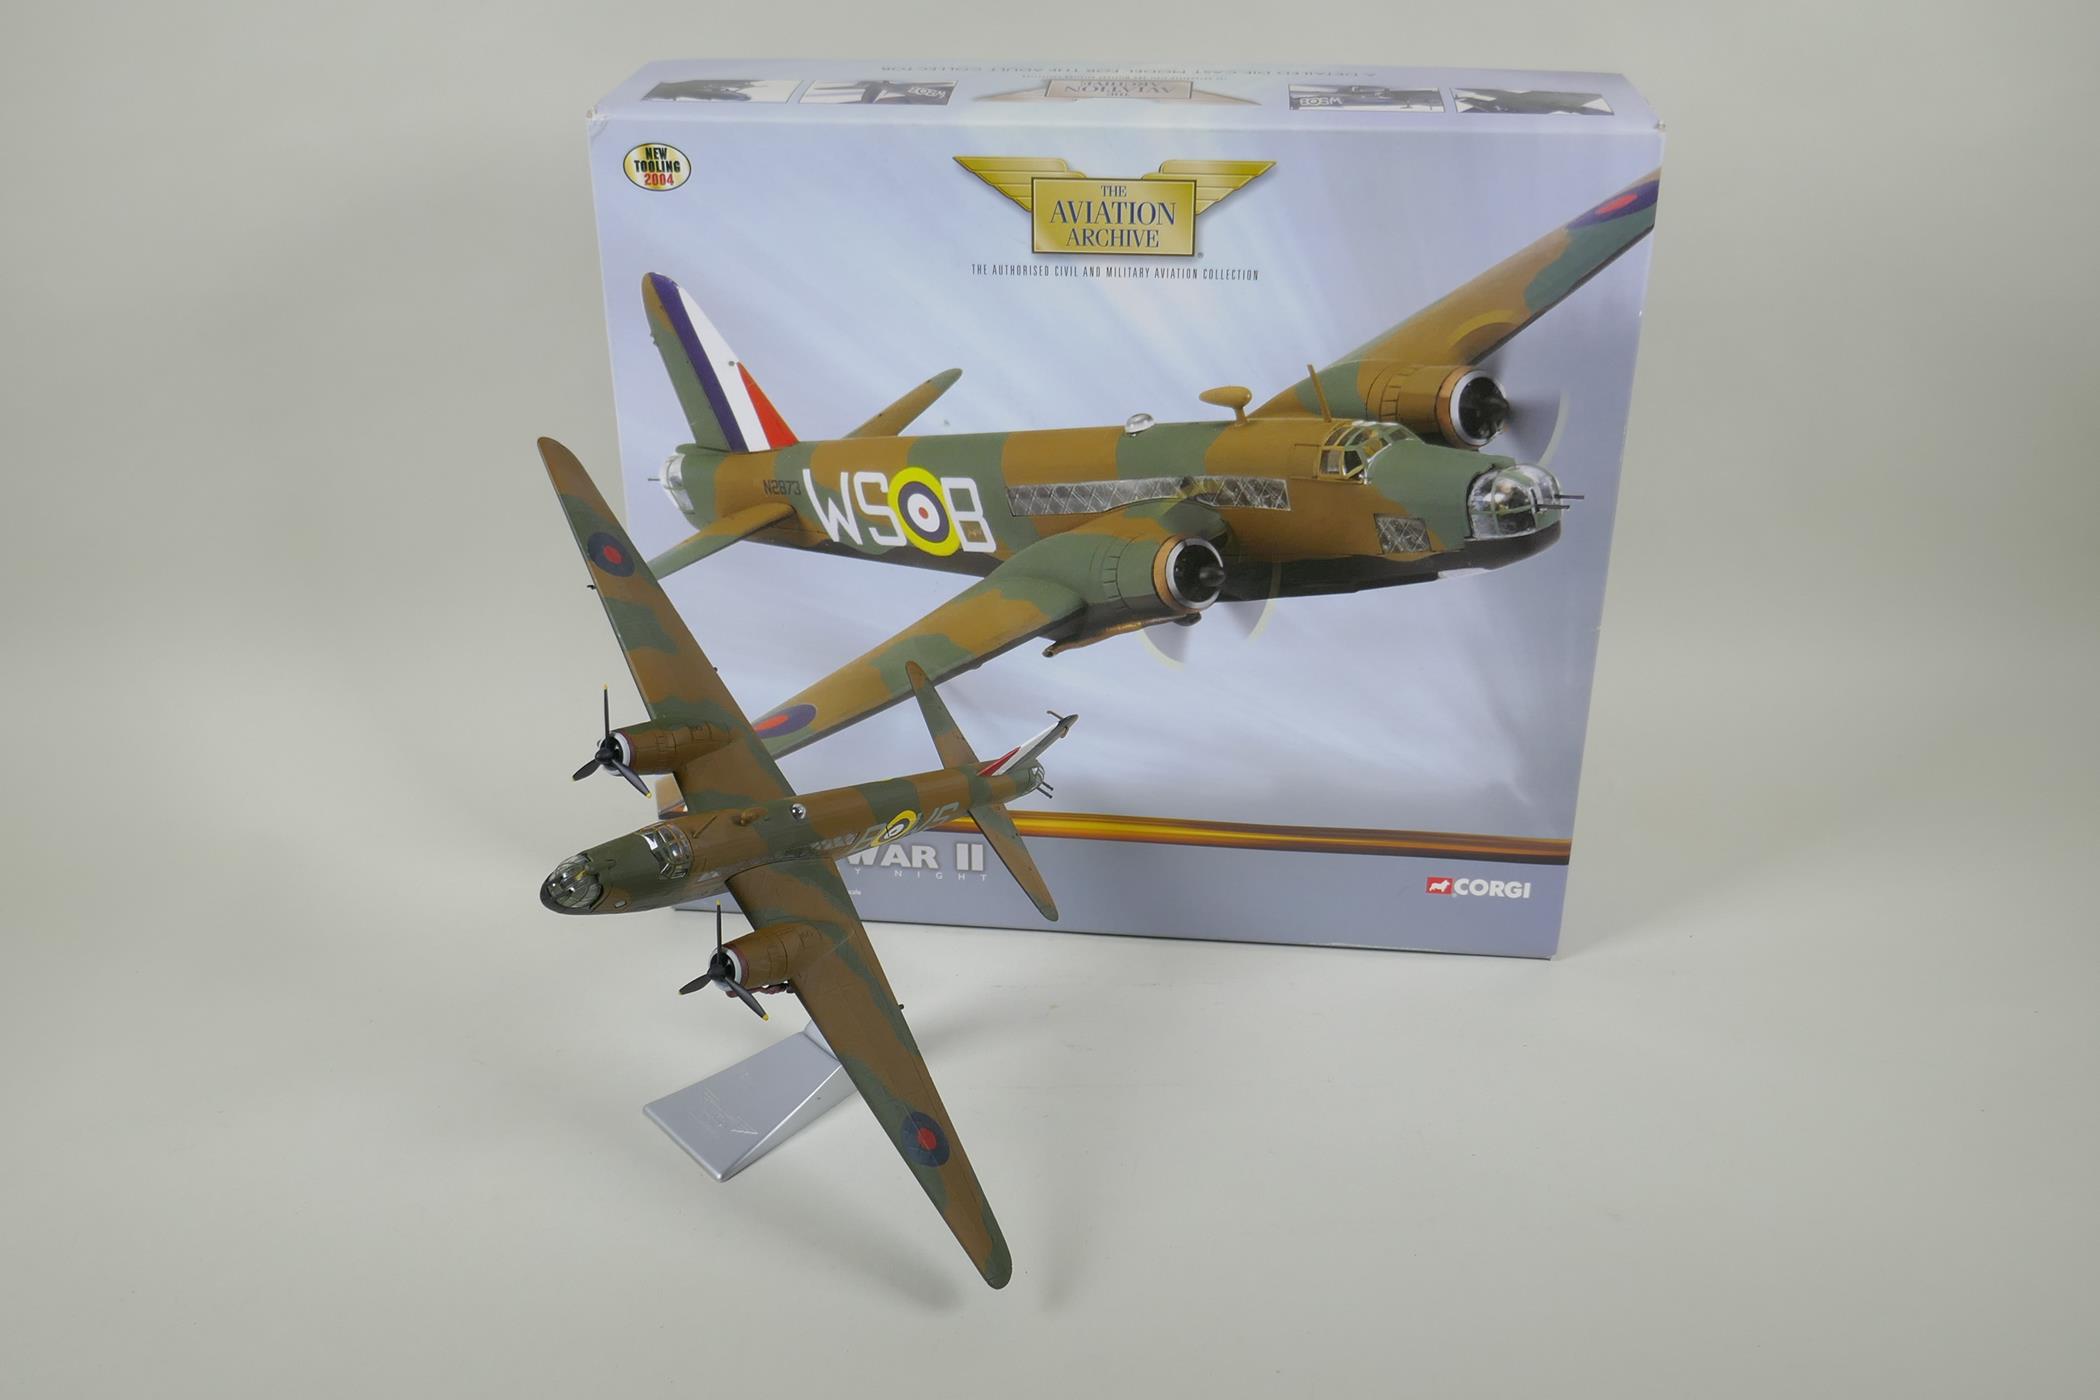 Two Corgi Aviation Archive diecast 1:72 scale models, including World War II/Atlantic By Night - Image 2 of 4